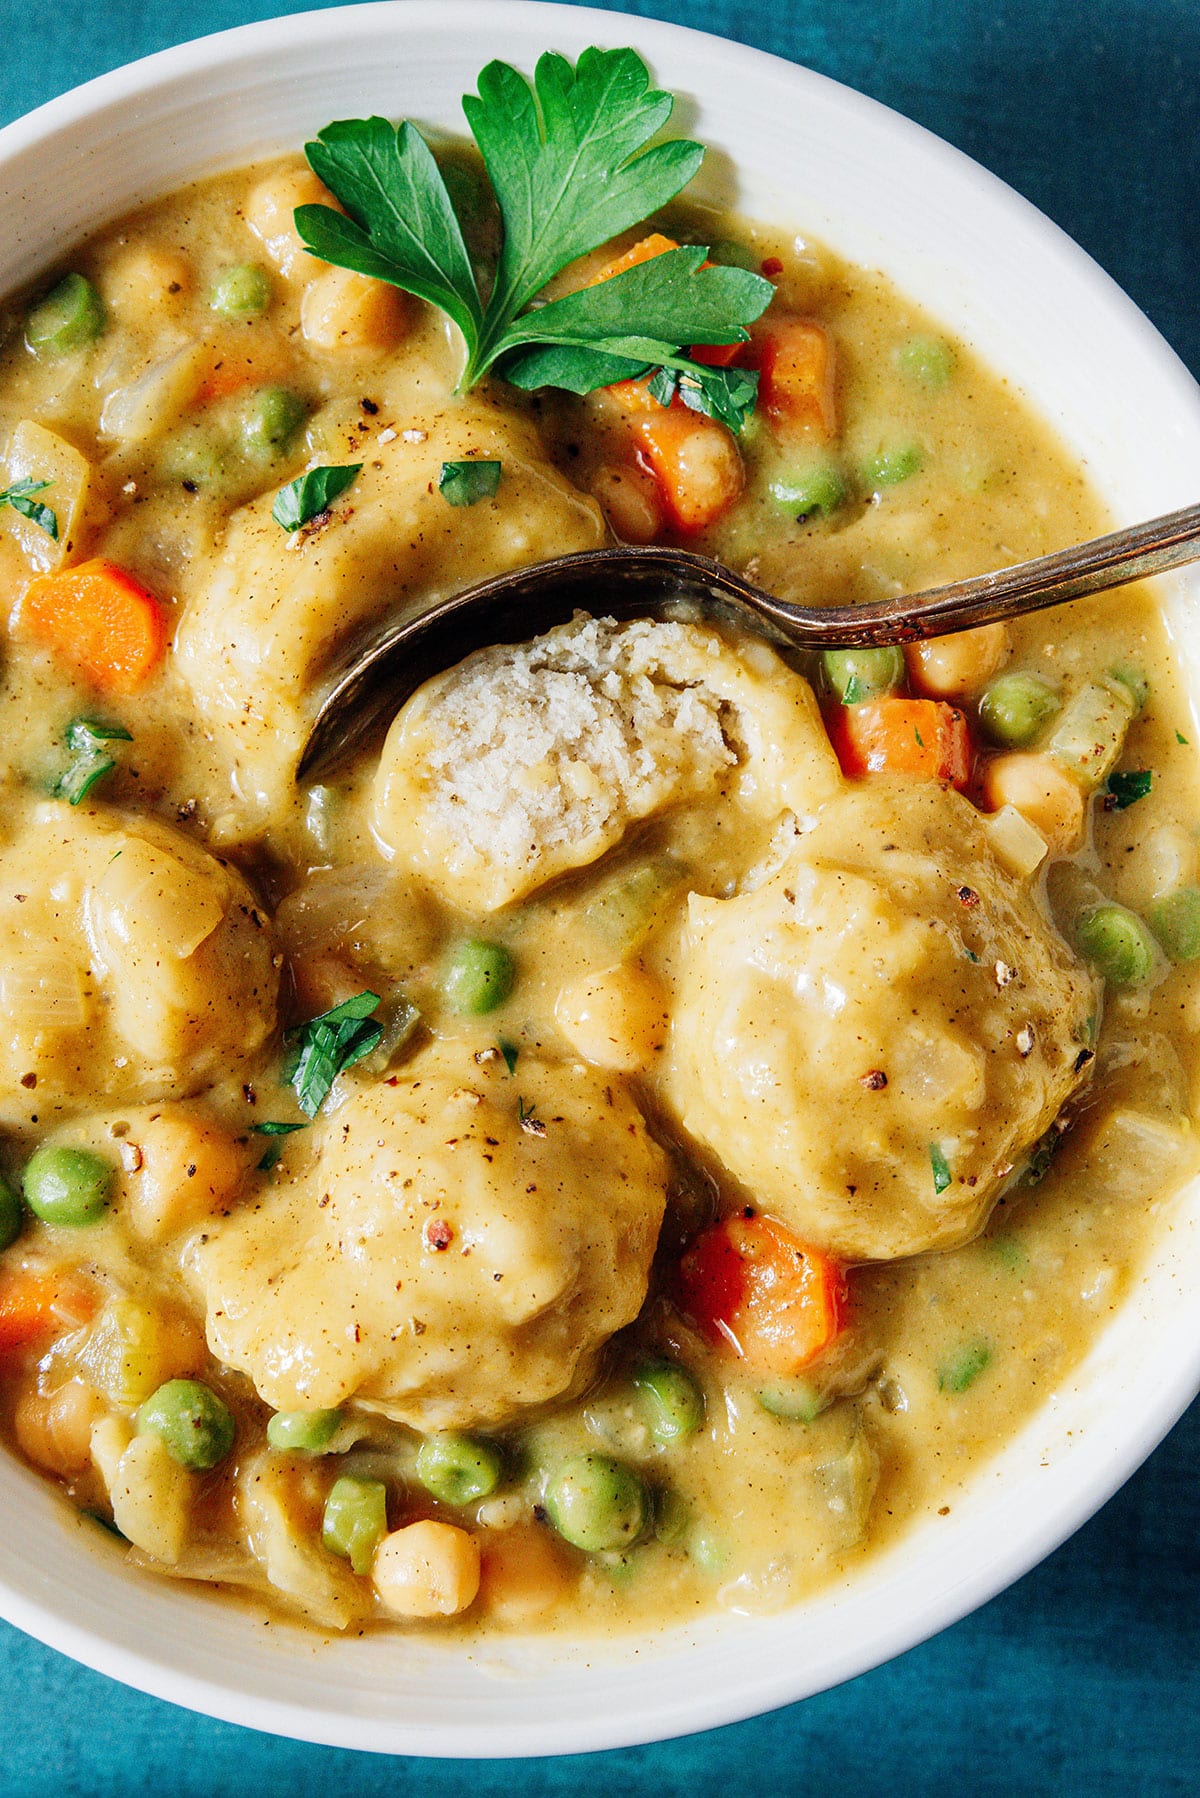 Vegan chicken and dumplings in a bowl, with a dumpling cut in half to show the inside.